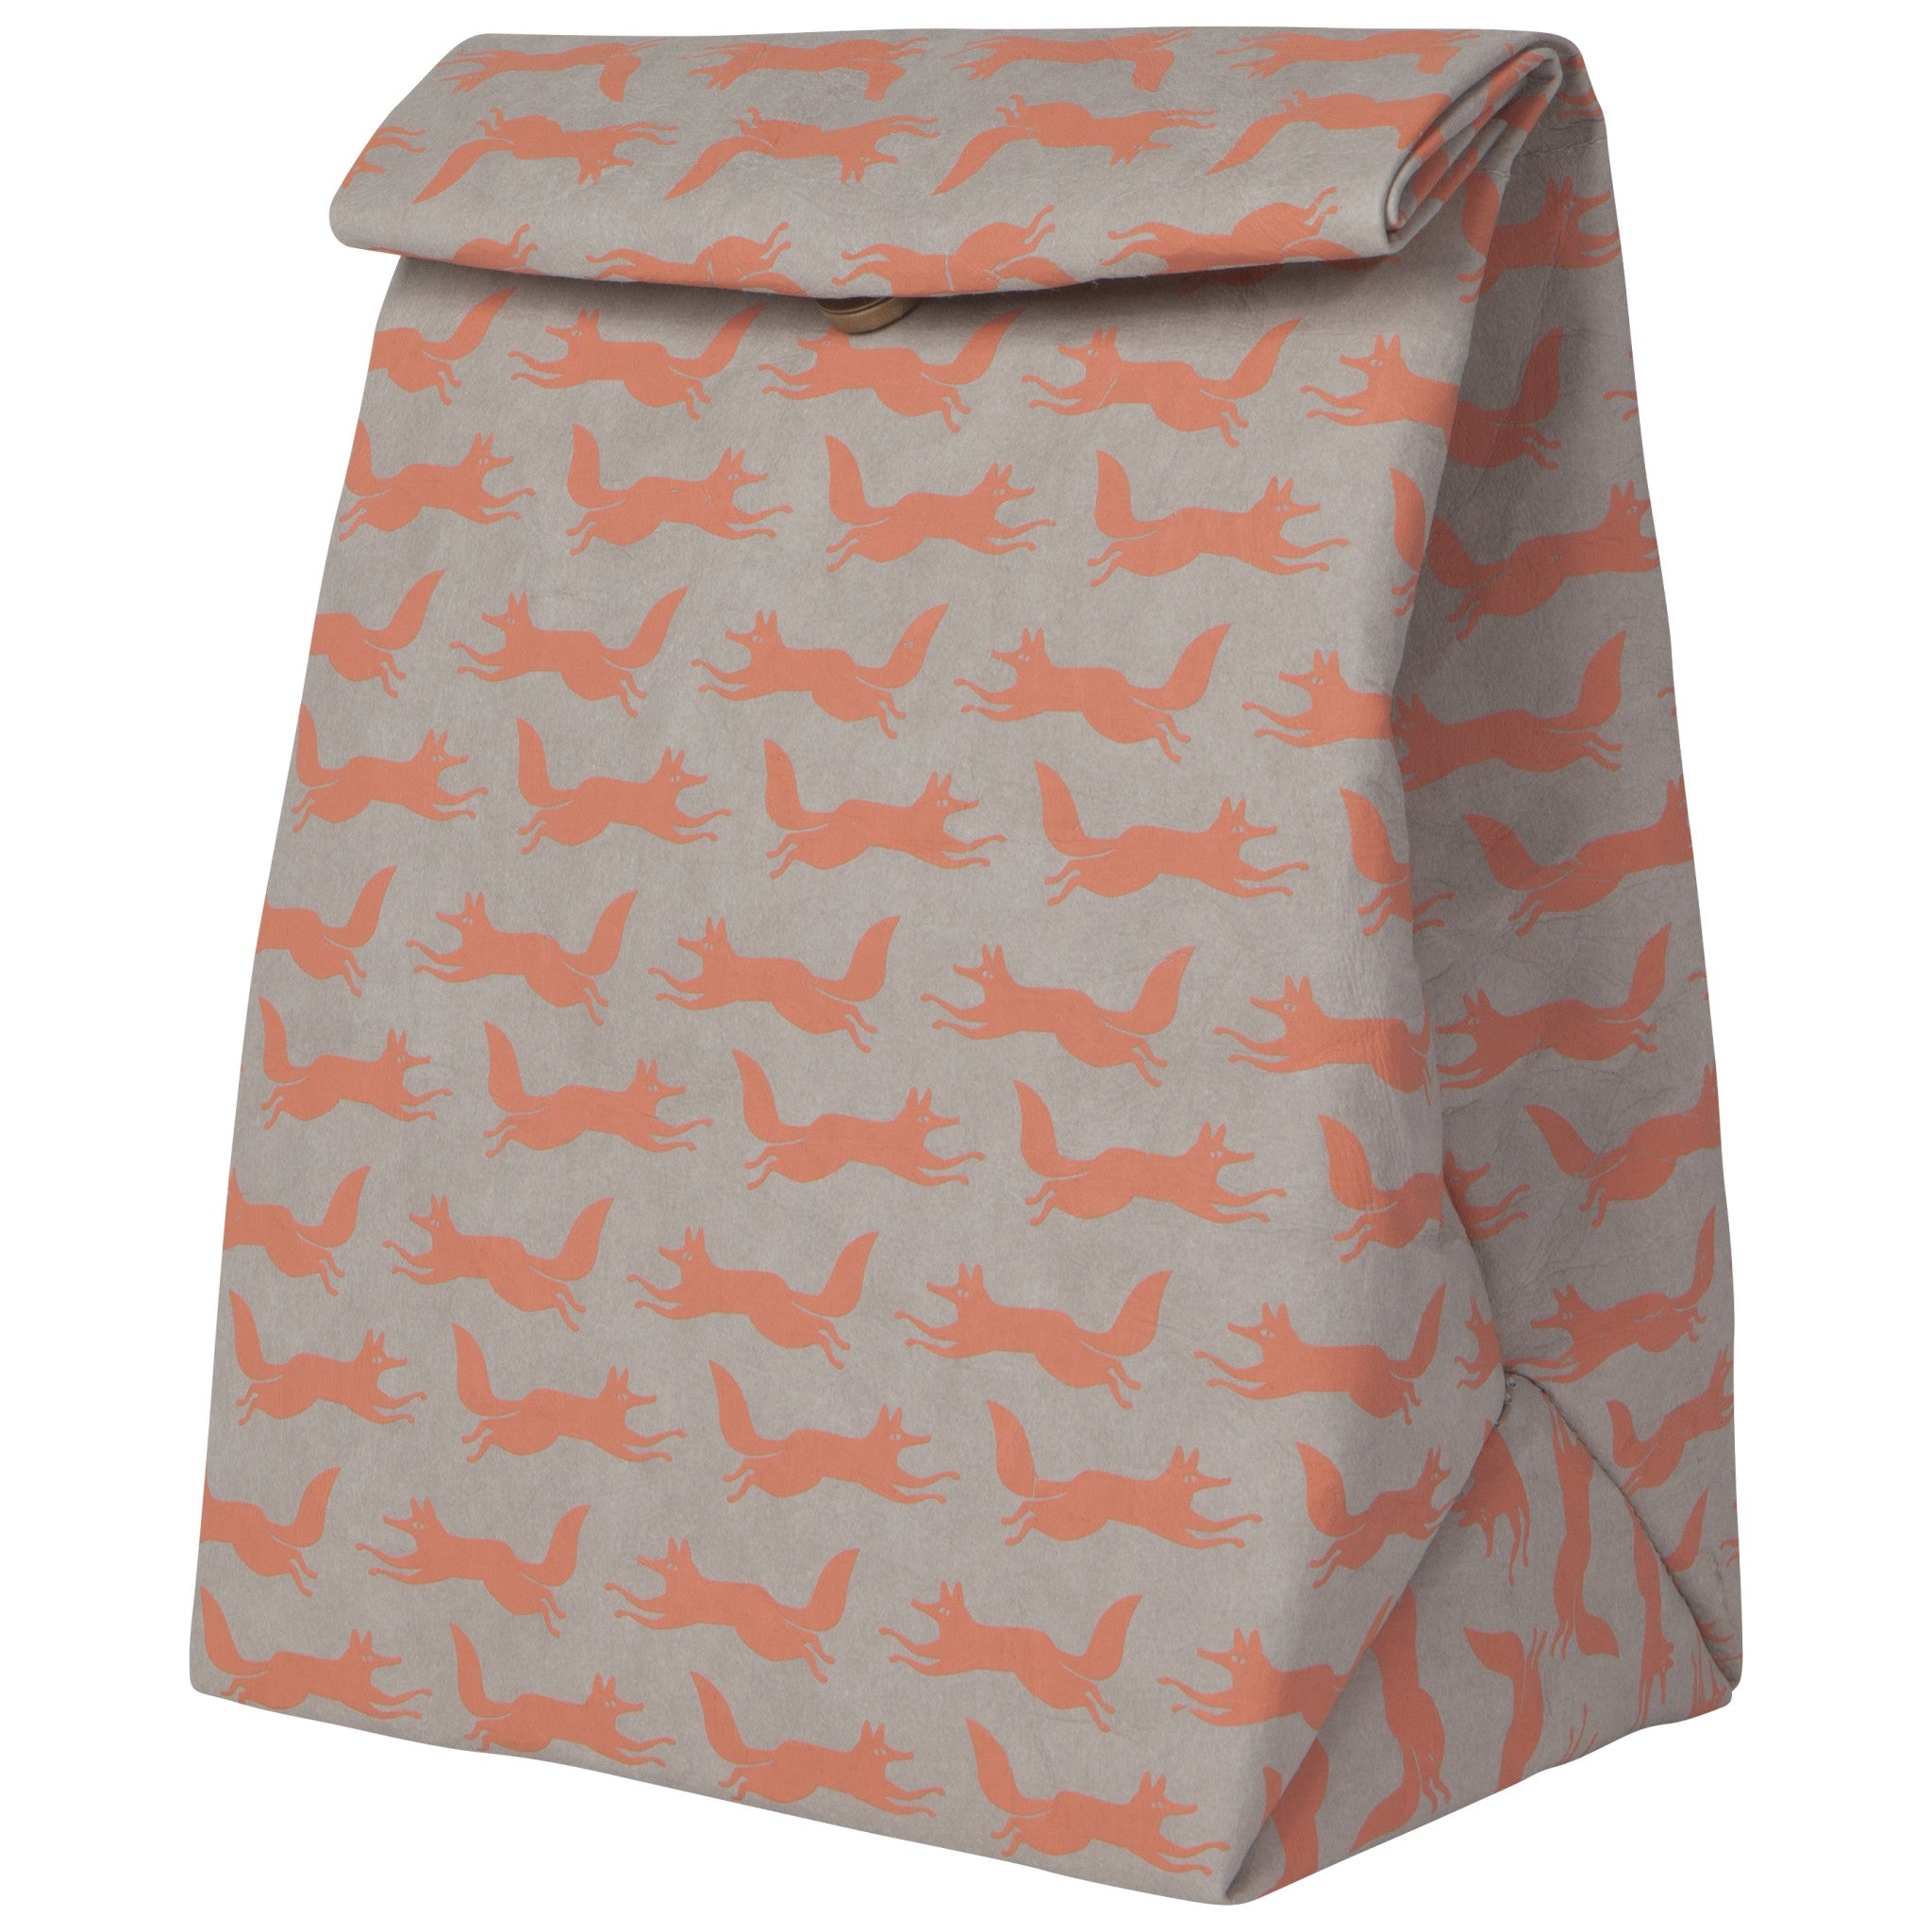 Rolled-up lunch bag